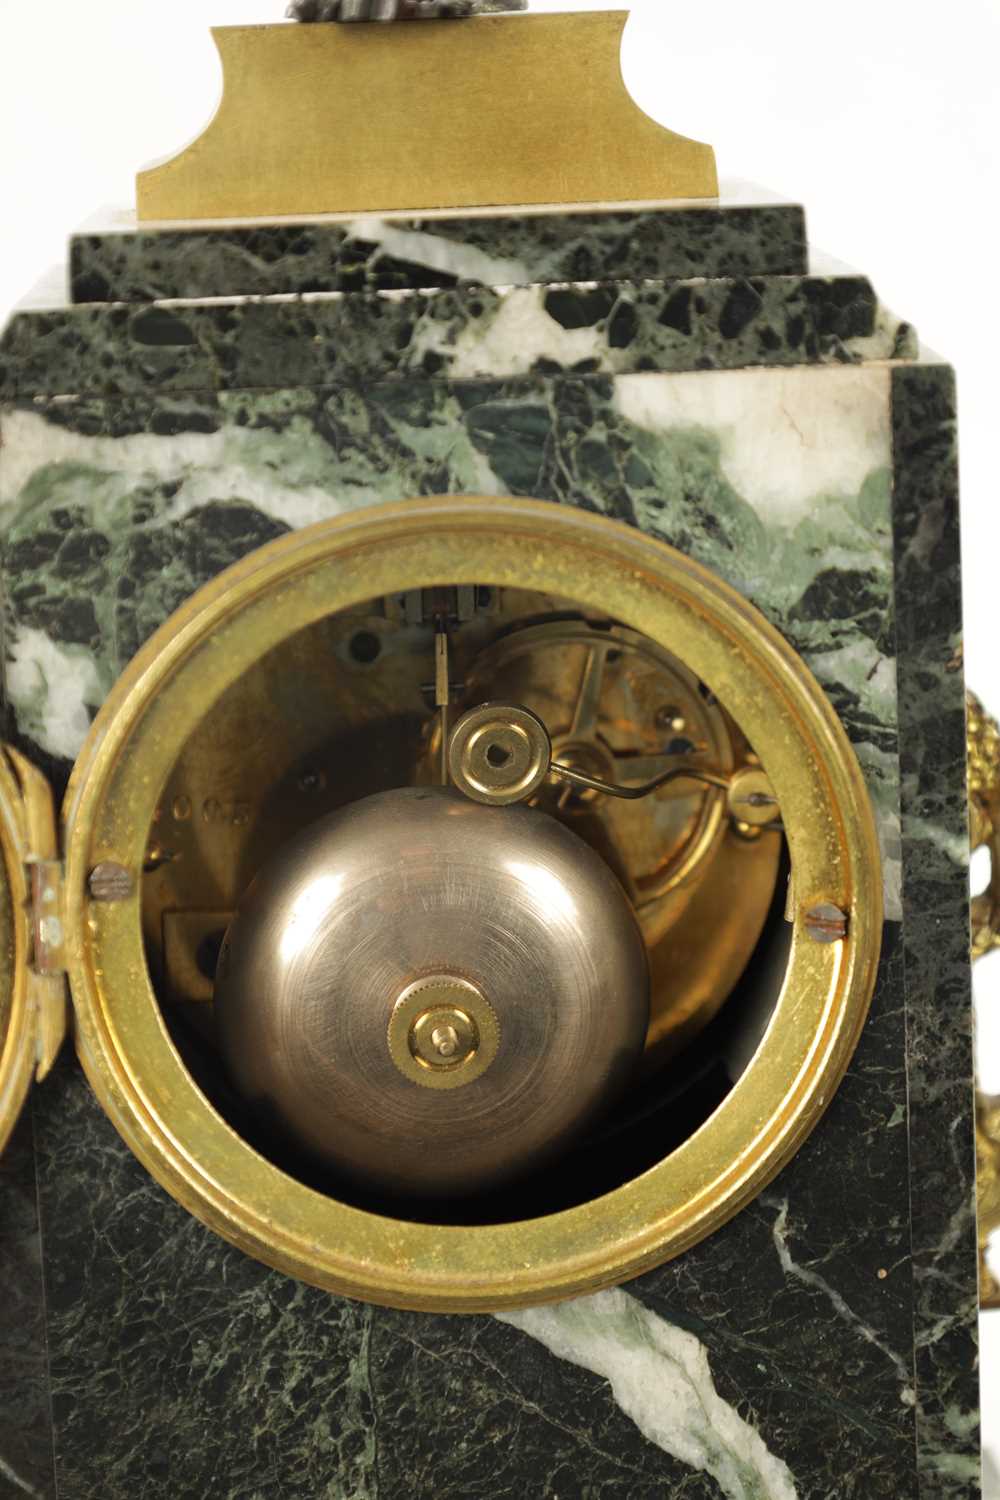 A LATE 19TH CENTURY FRENCH ANTICO VERDE MARBLE, BRONZE AND ORMOLU MANTEL CLOCK - Image 10 of 12